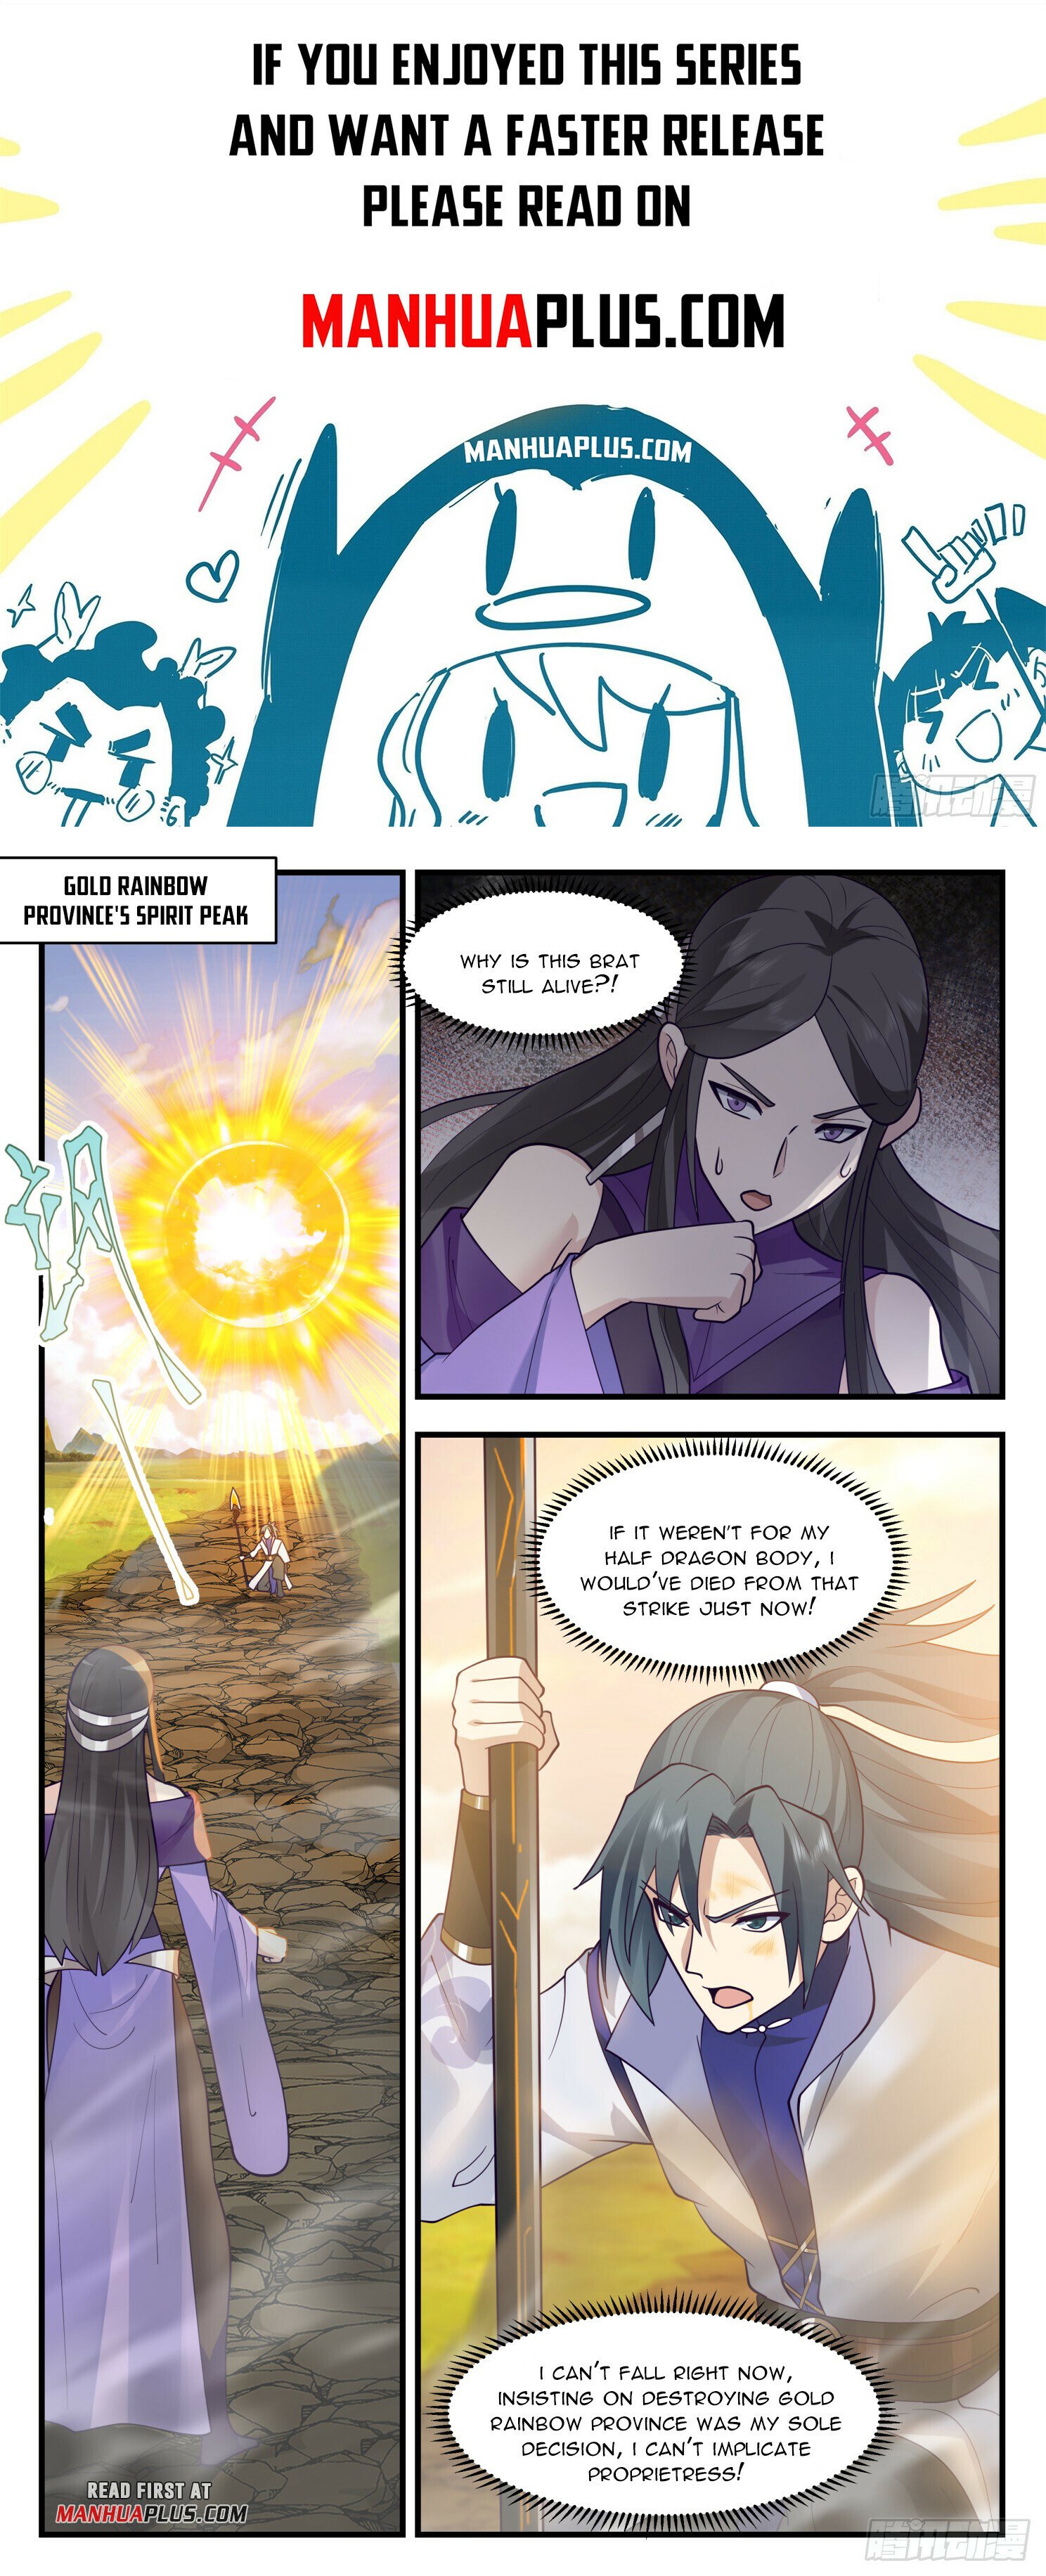 Martial Peak - Chapter 20595 - Coming Back Safely - Image 1